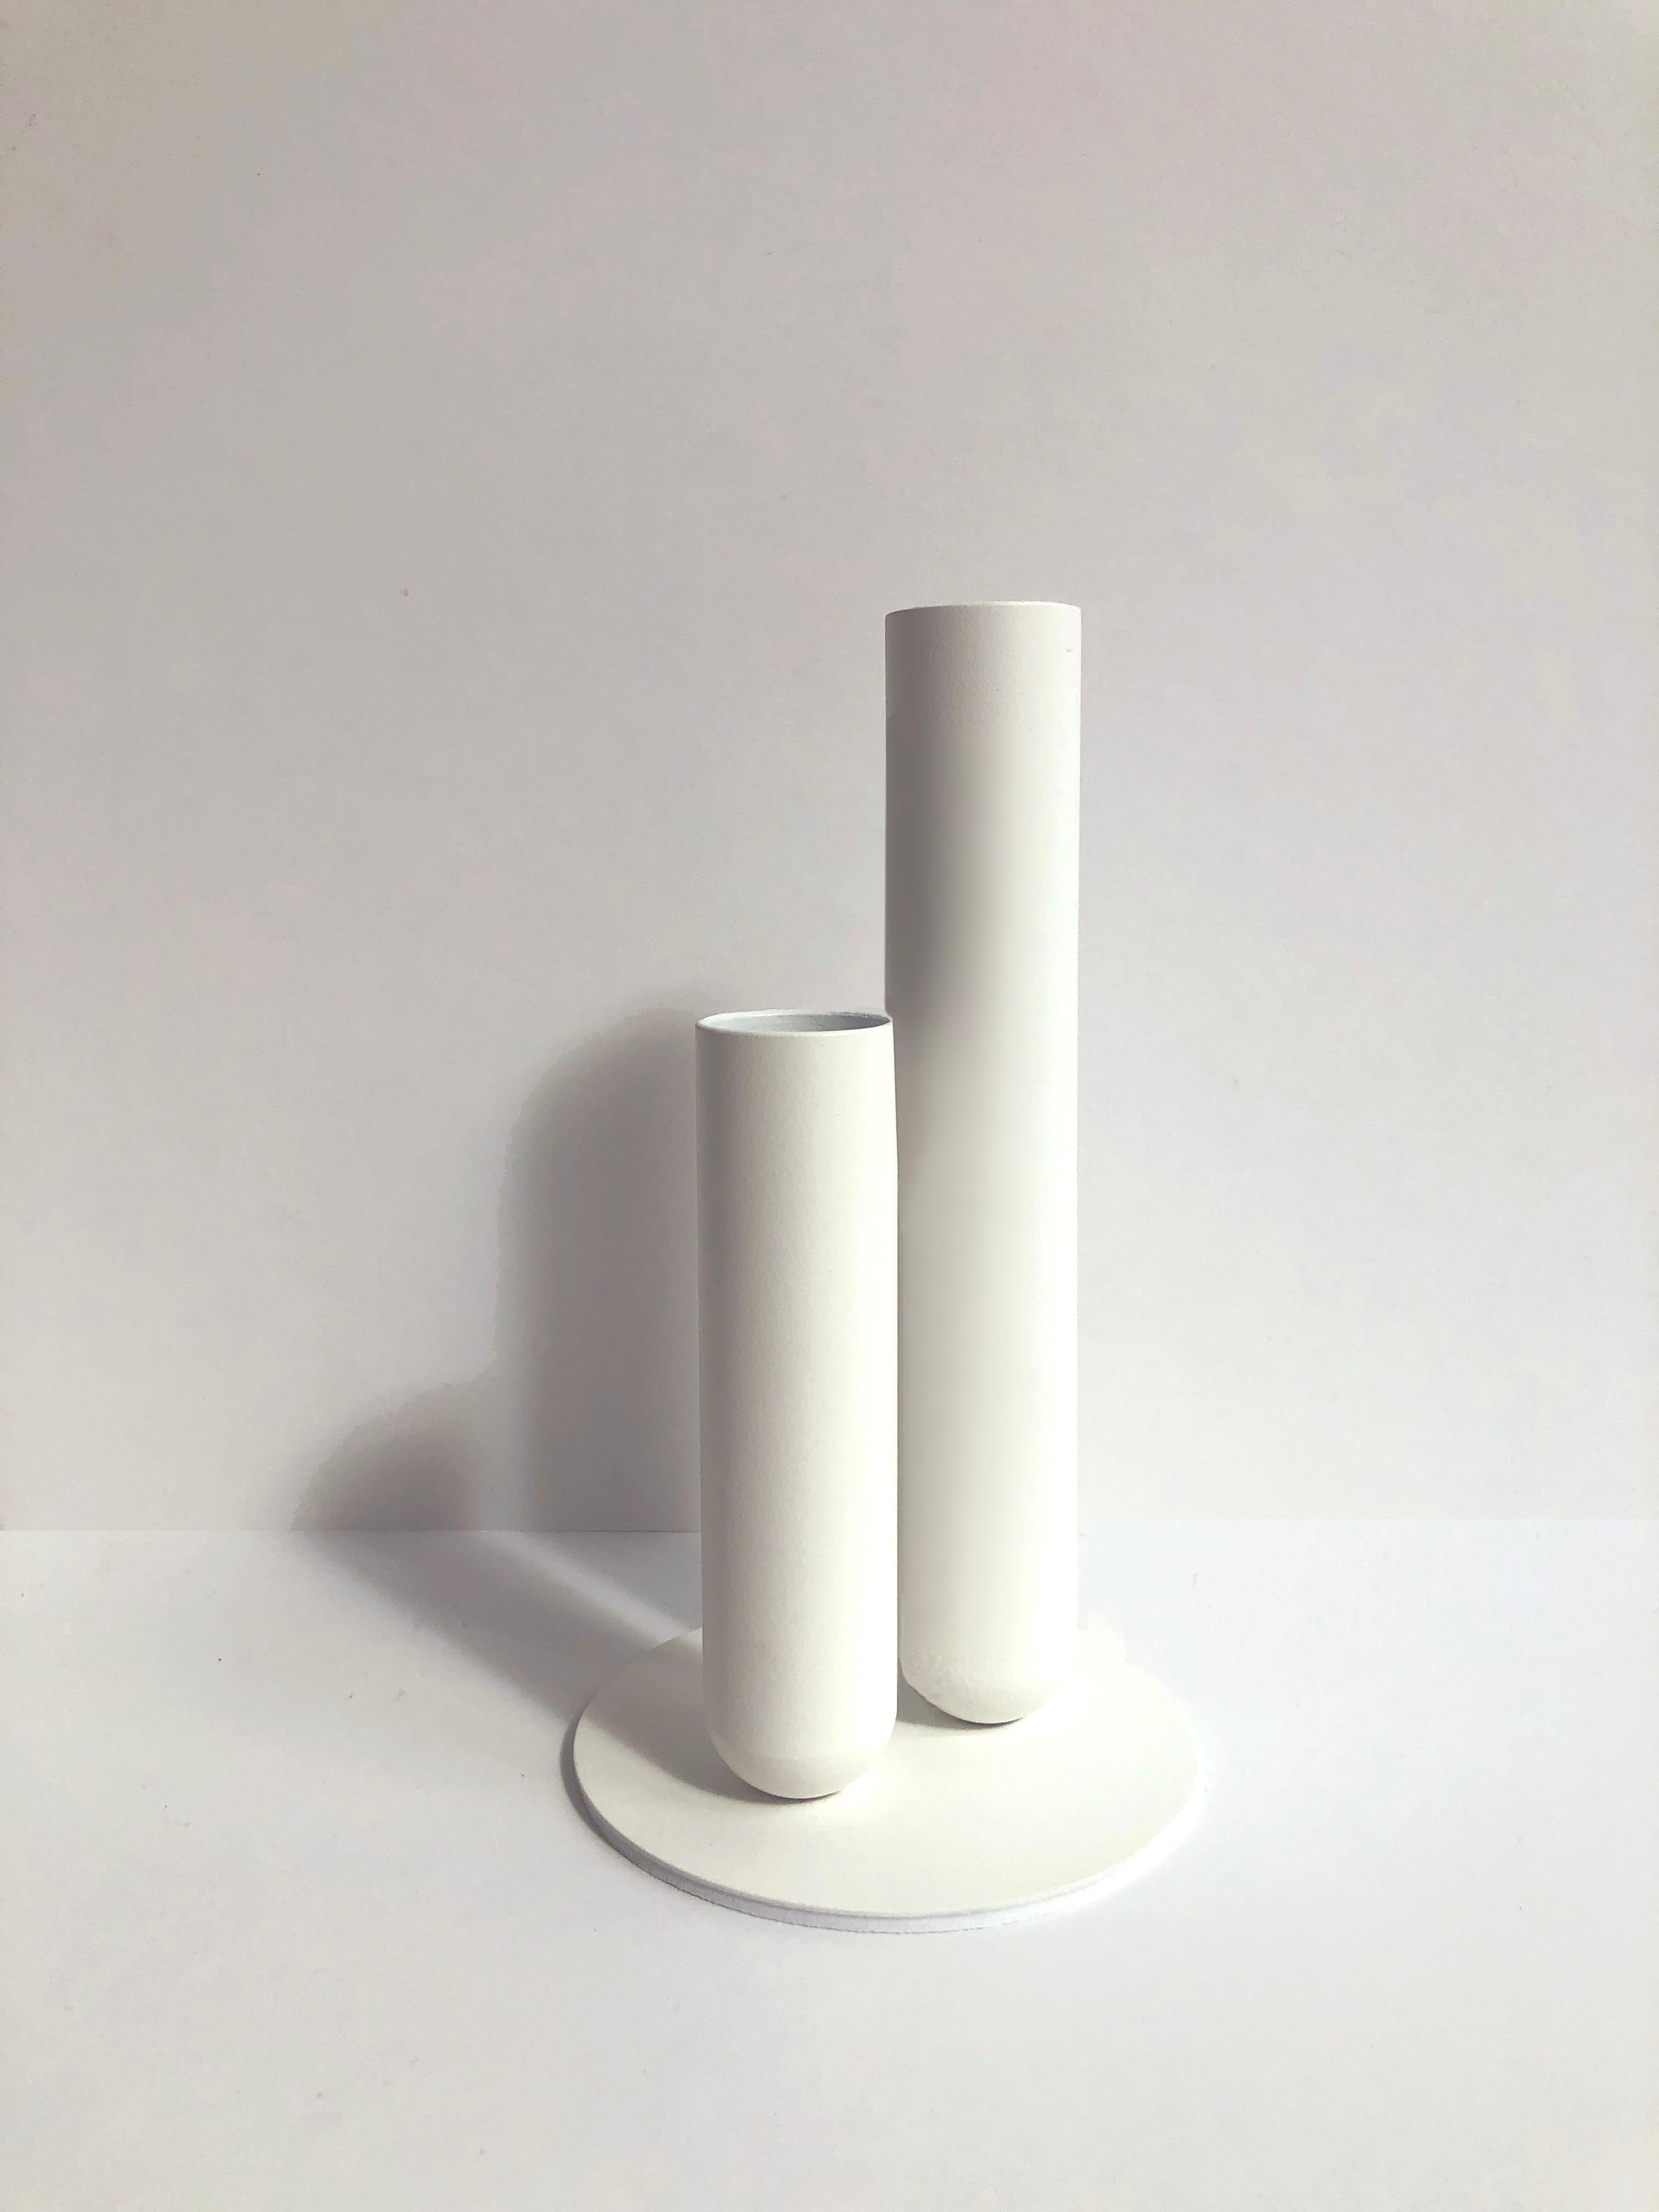 Set of 2 Soliflore White Vases by Mademoiselle Jo
Dimensions: Ø 8.5 x H 15 cm (each.)
Materials: Turned metal with magnet and EVA foam tray.

Hollow cylinders of 15 cm and 10 cm, diameter 2.5 cm. Plate diameter of 8.5 cm. Metal version with matt